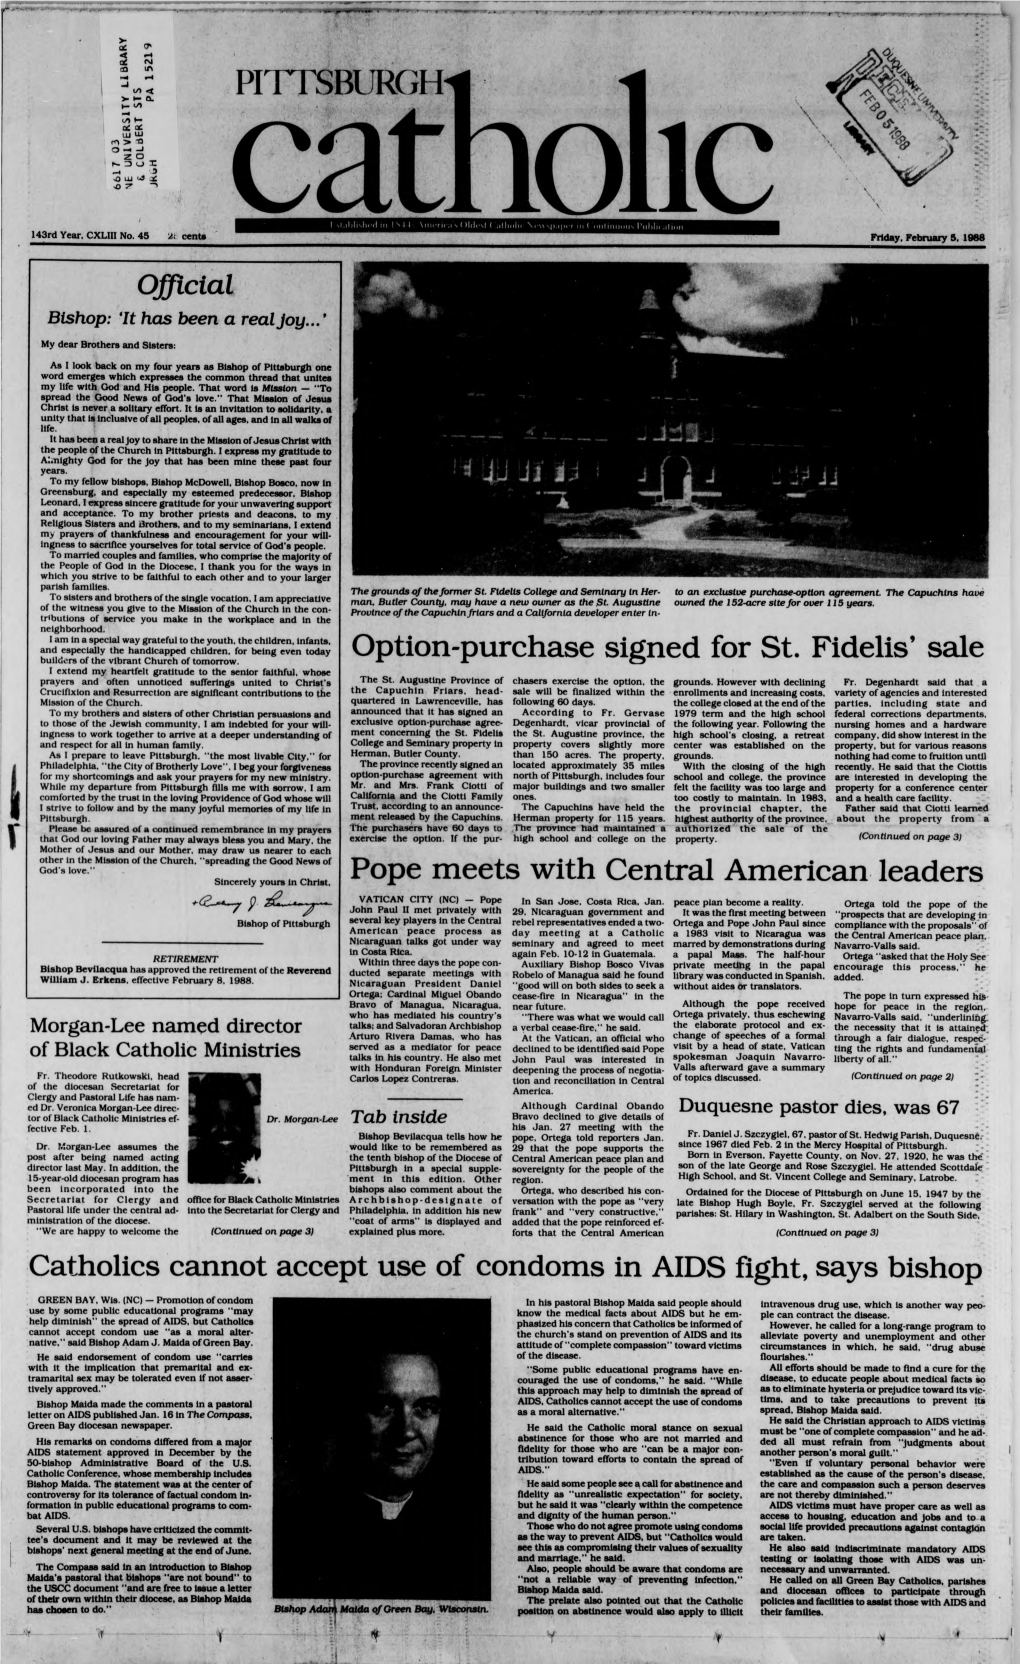 PITTSBURGH Option-Purchase Signed for St. Fidelis' Sale Pope